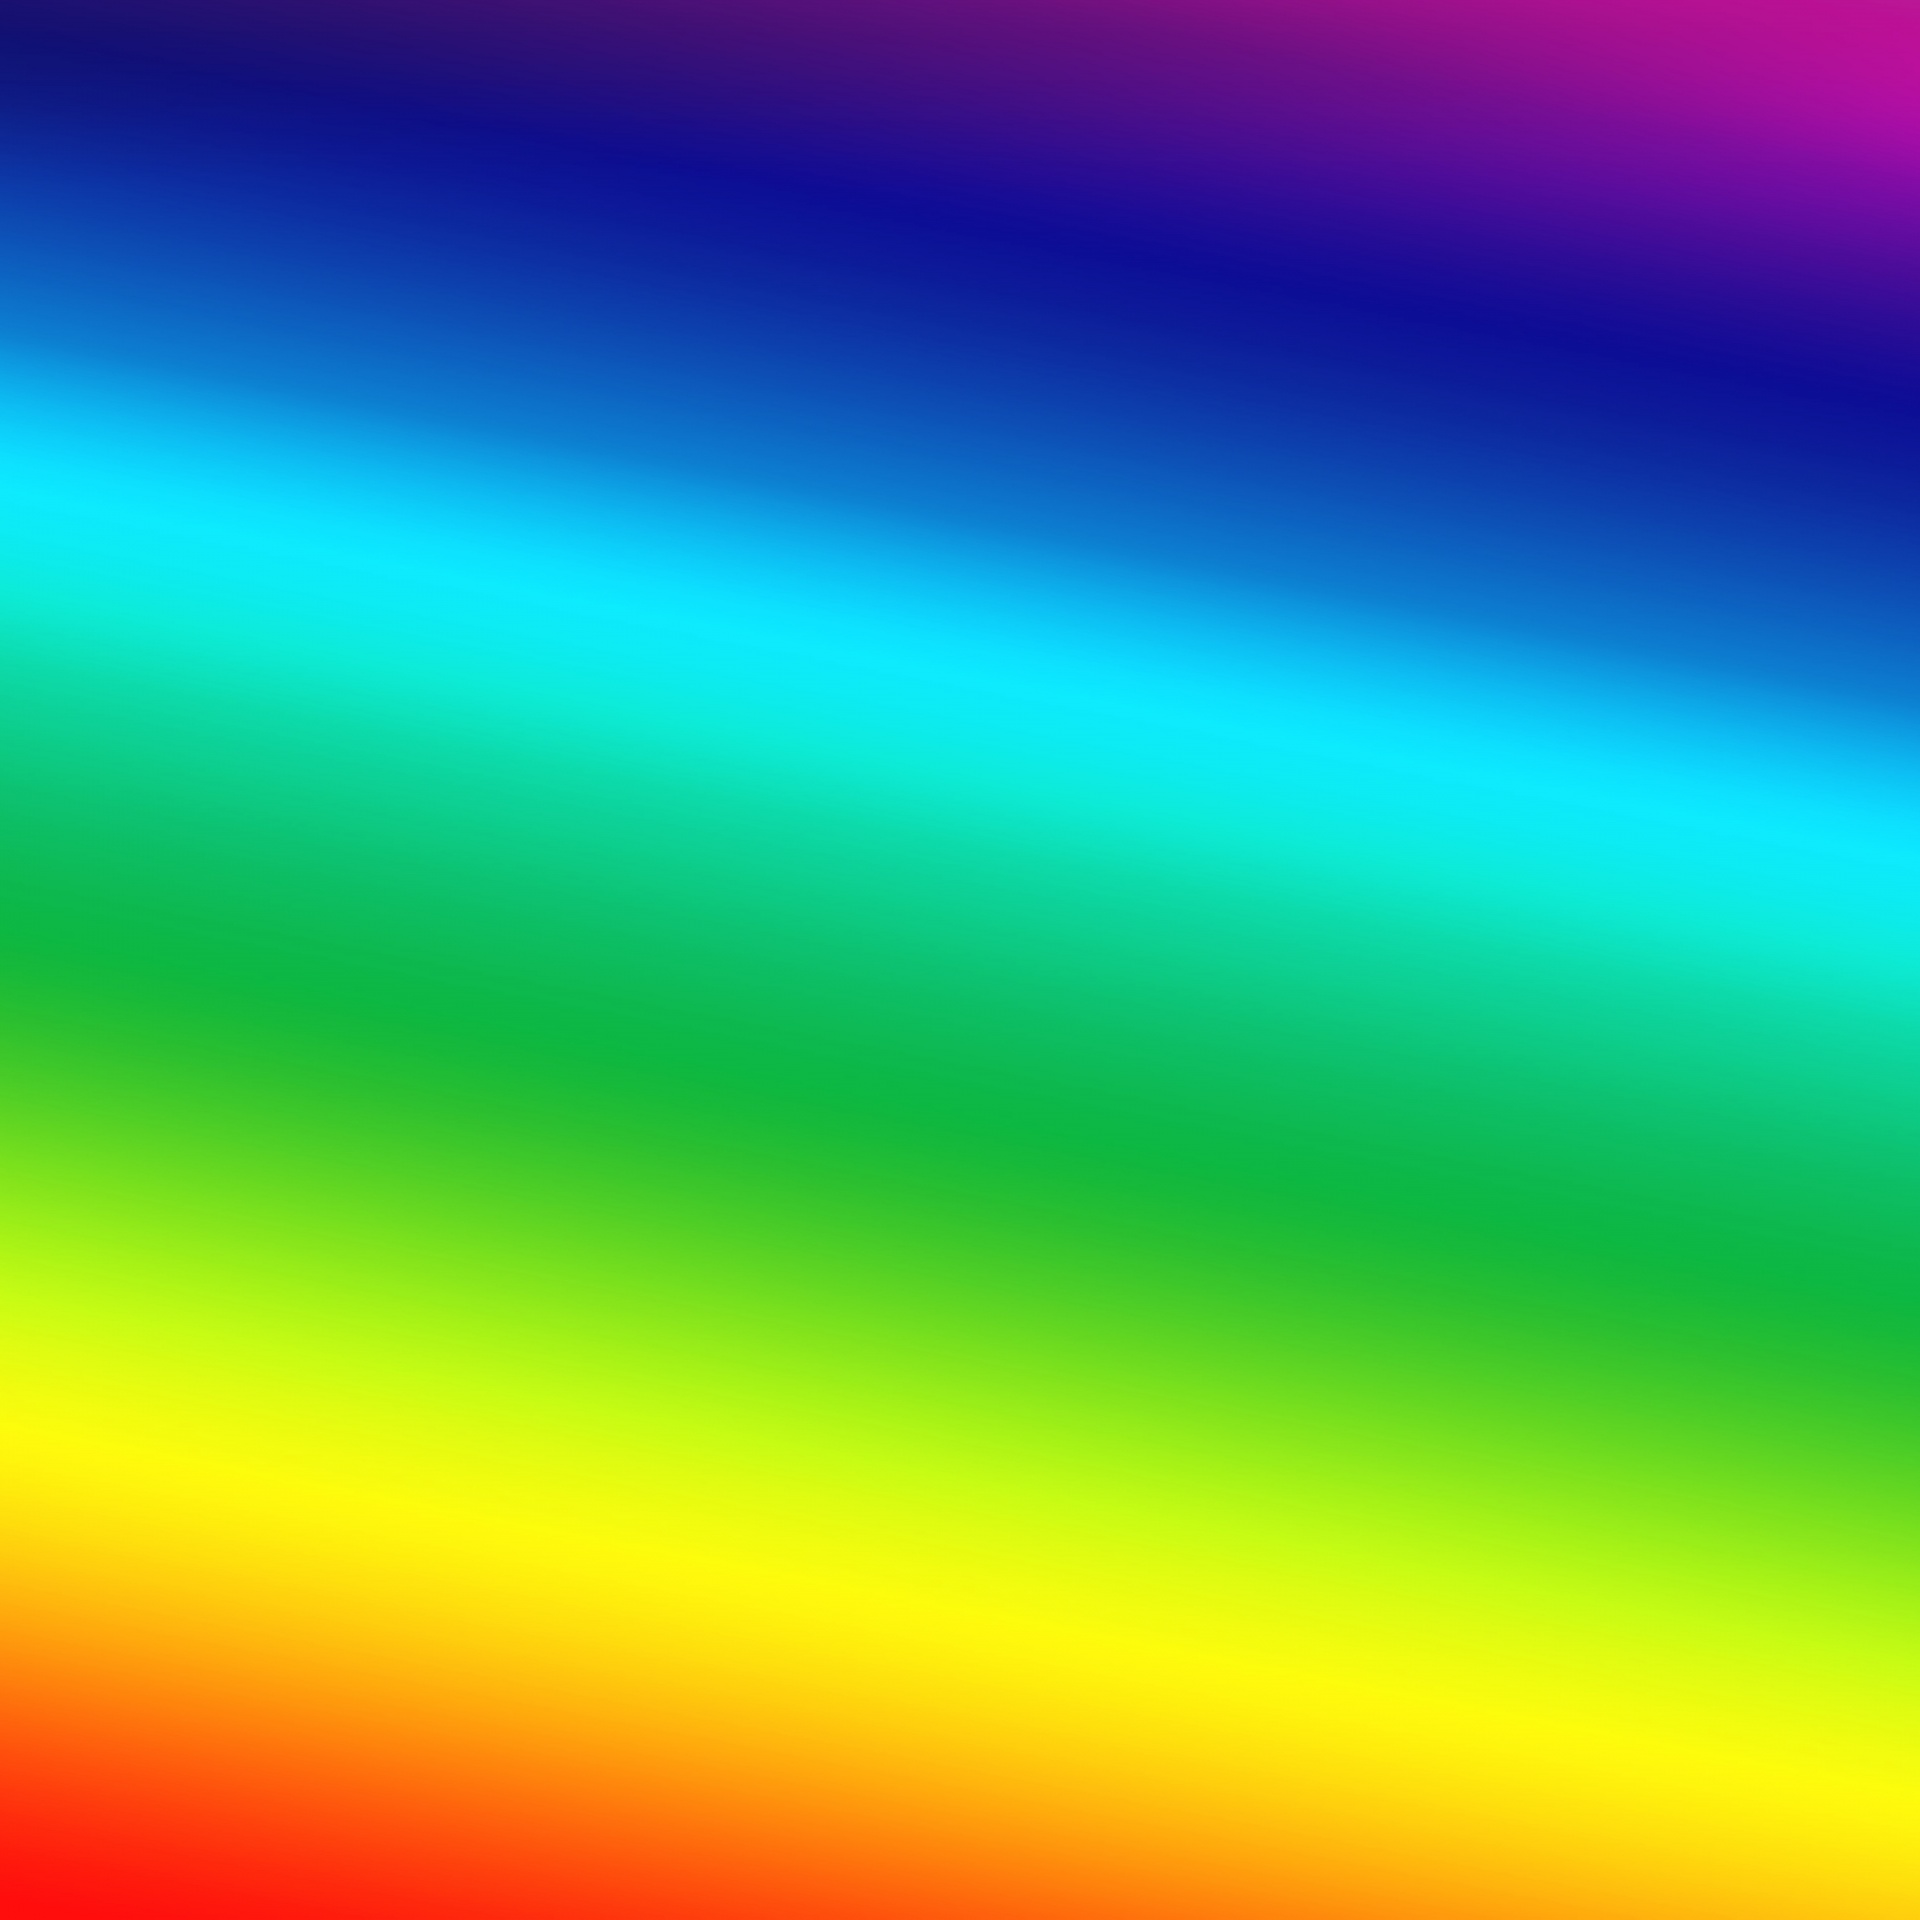 Red Green Blue Free Photo - Background Red Yellow Green Blue Gradient - HD Wallpaper 